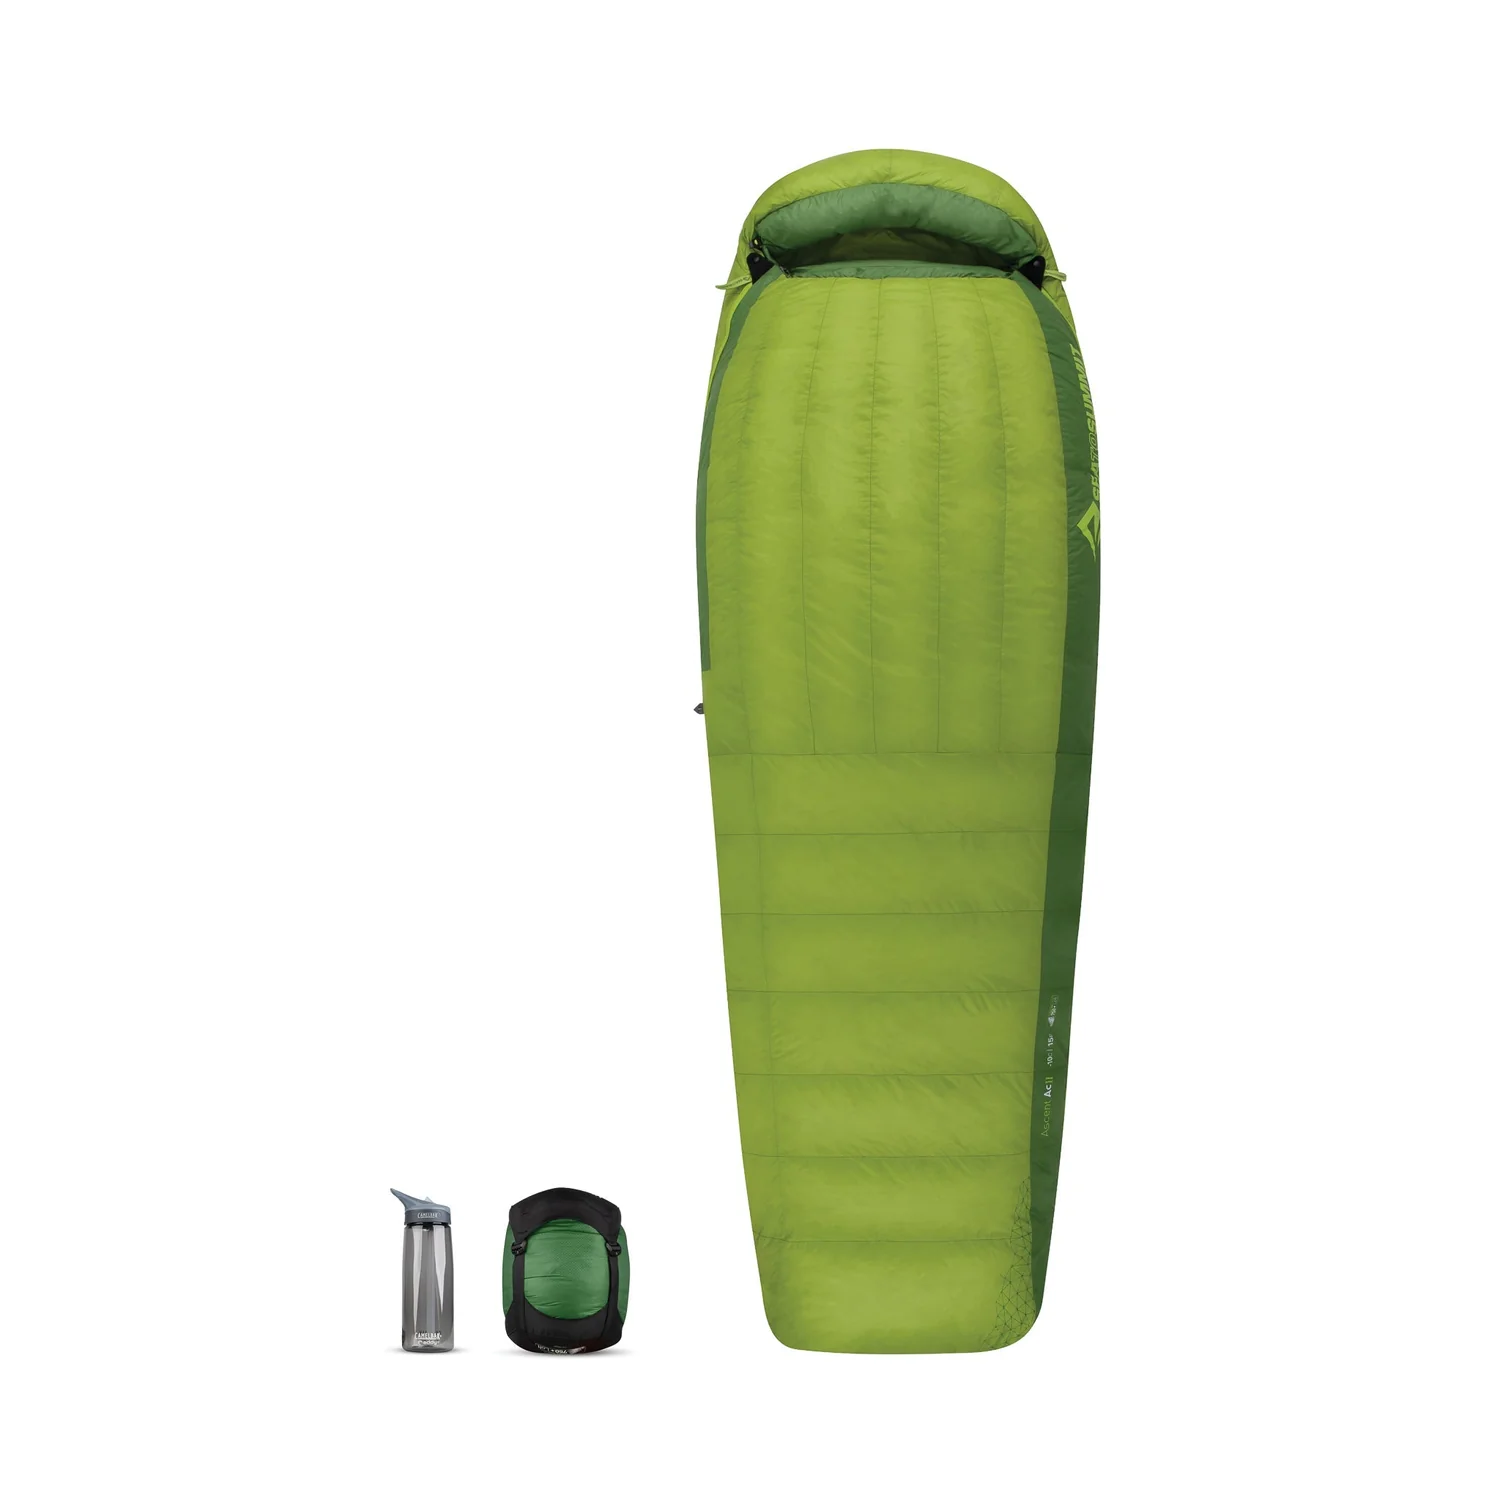 Ascent-Down-Sleeping-Bag-Backpacking_e1720022-a30b-4a6f-9f10-631ab2451506